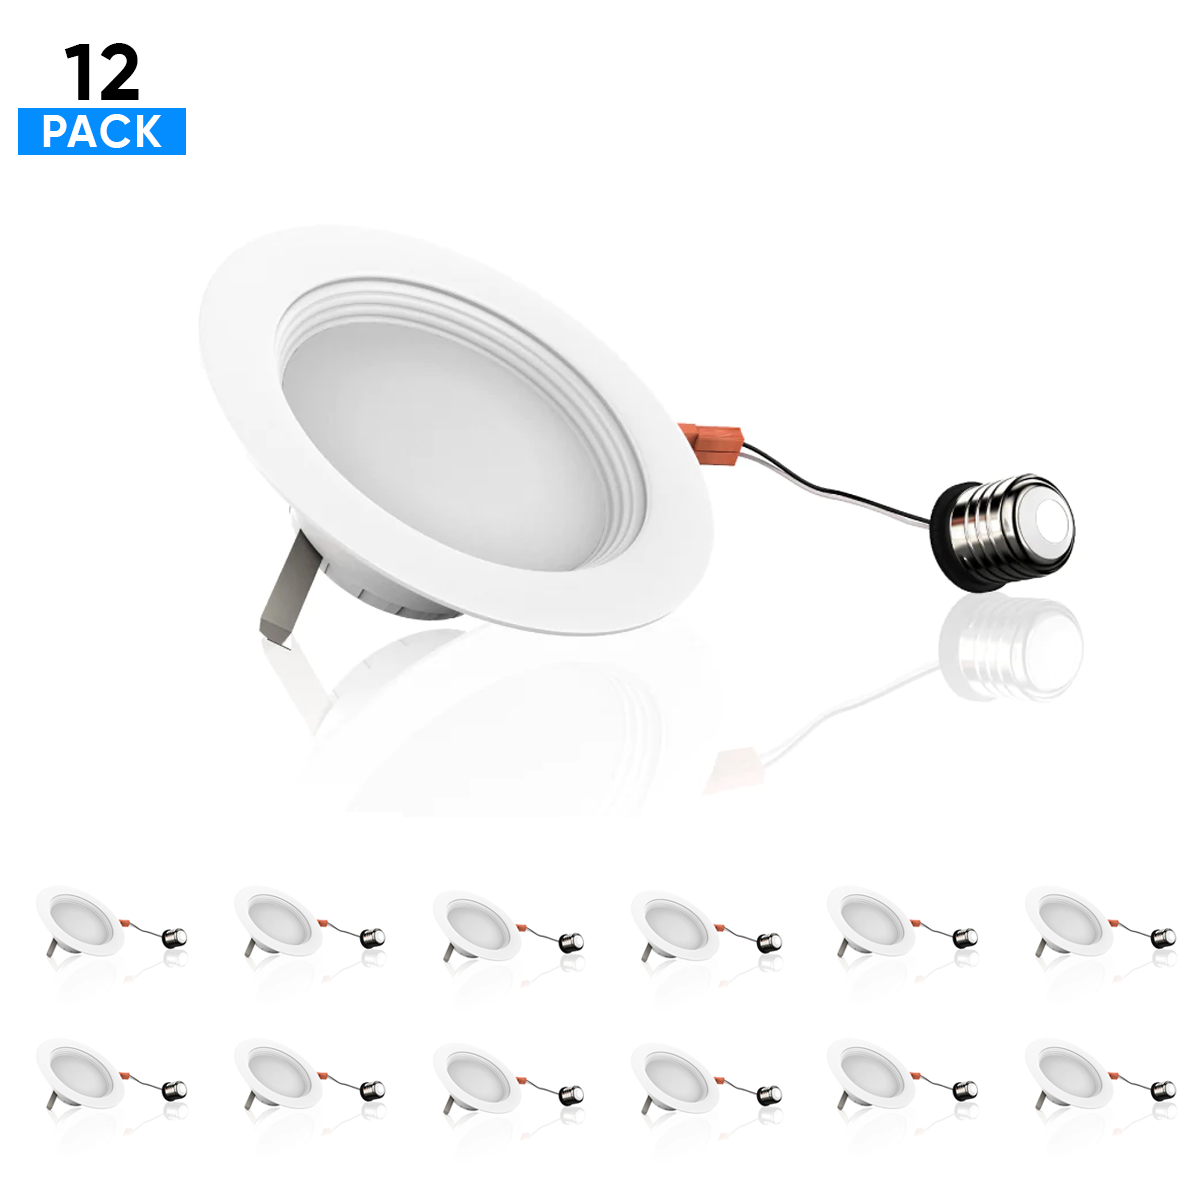 4 Inch LED Recessed Lighting, 10W, Dimmable, ETL Listed, Baffle Trim, Recessed Downlights For Closets, Kitchens, Hallways, Basement